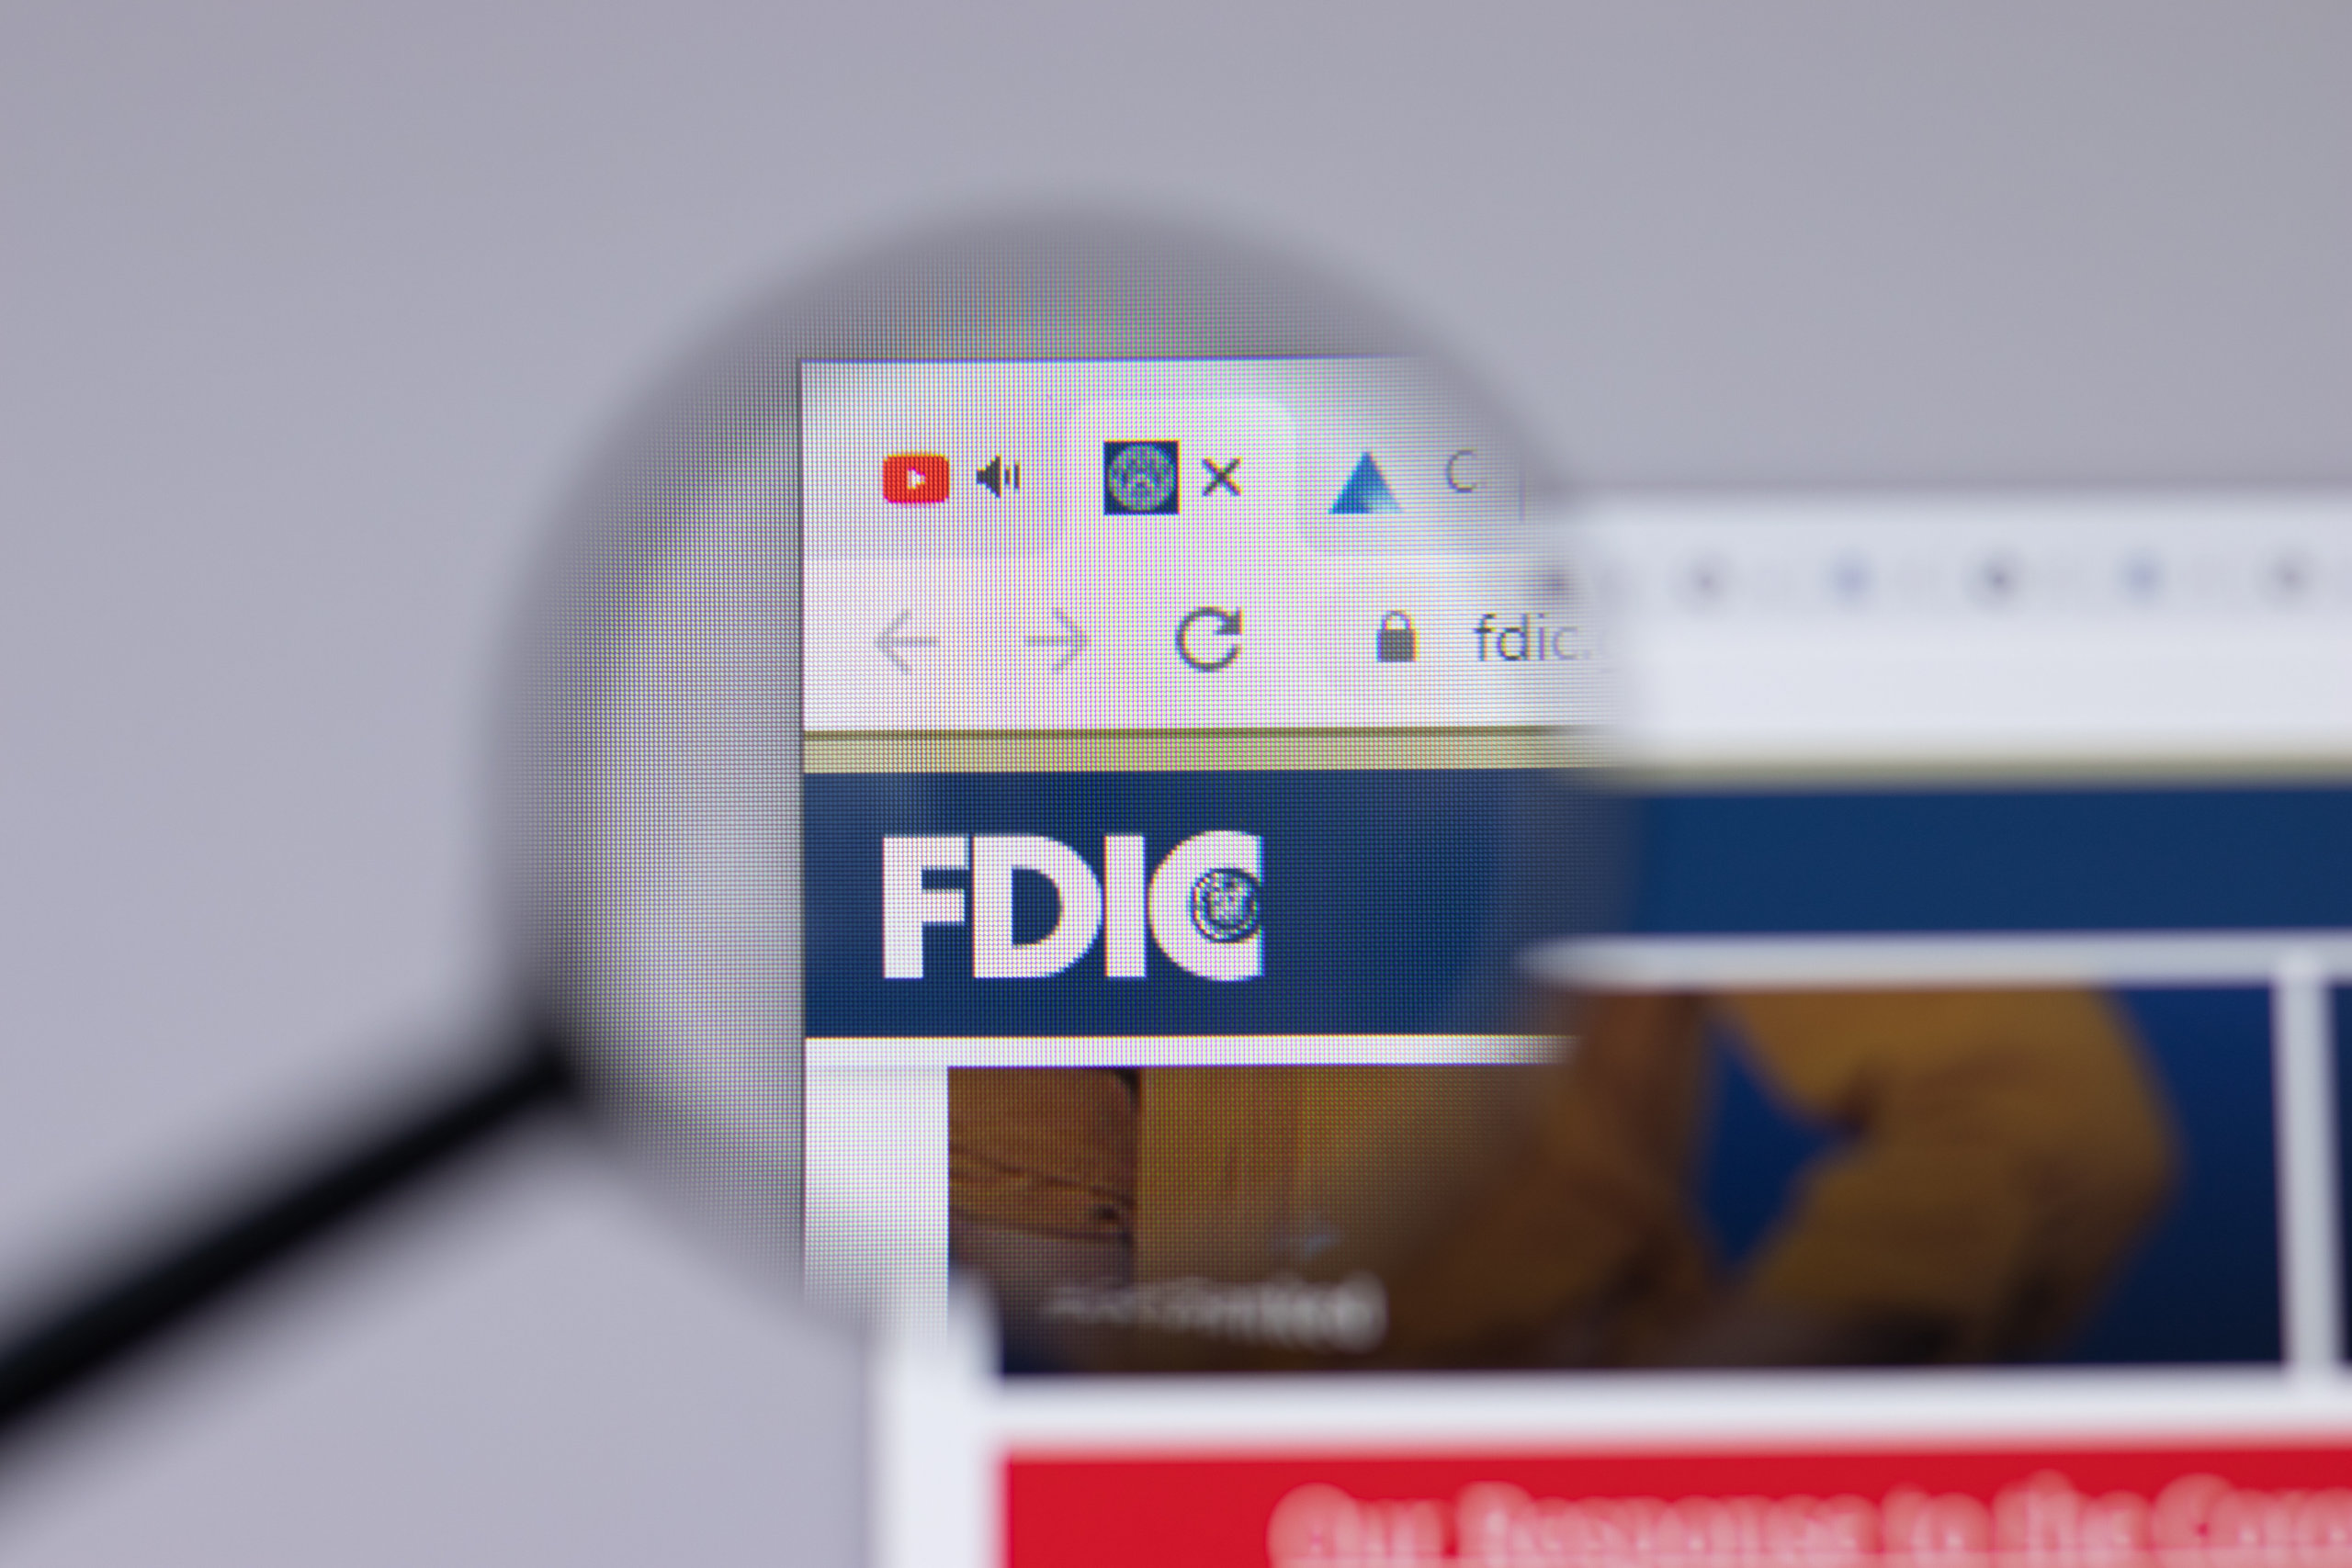  hold crypto banks fdic letting exploring possibility 